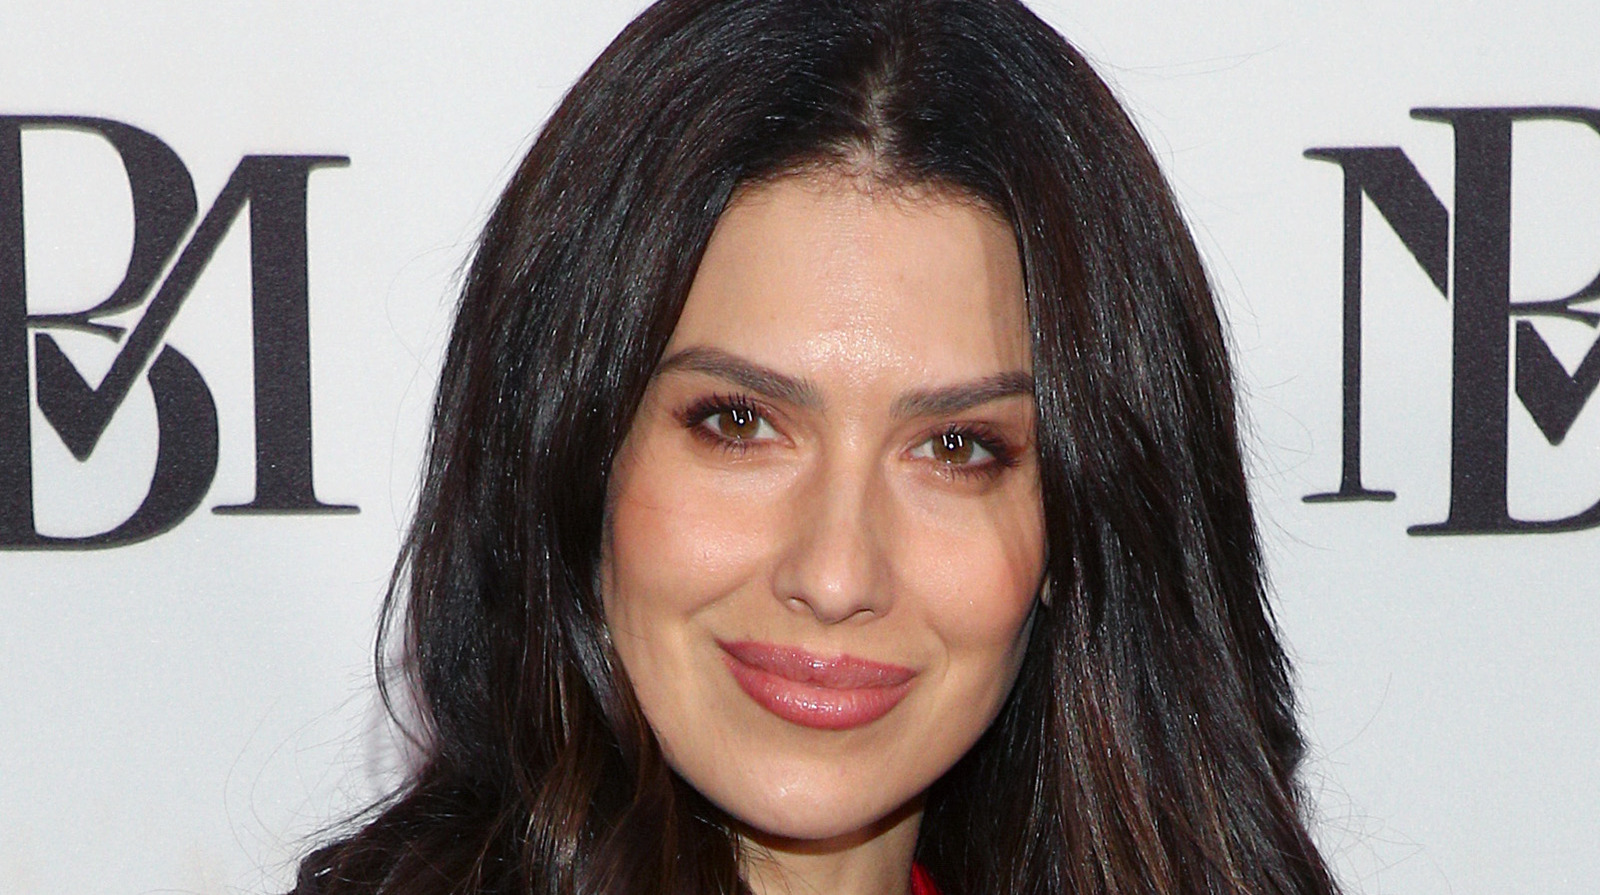 Inside Hilaria Baldwin's Emotional Message About Baby No. 6